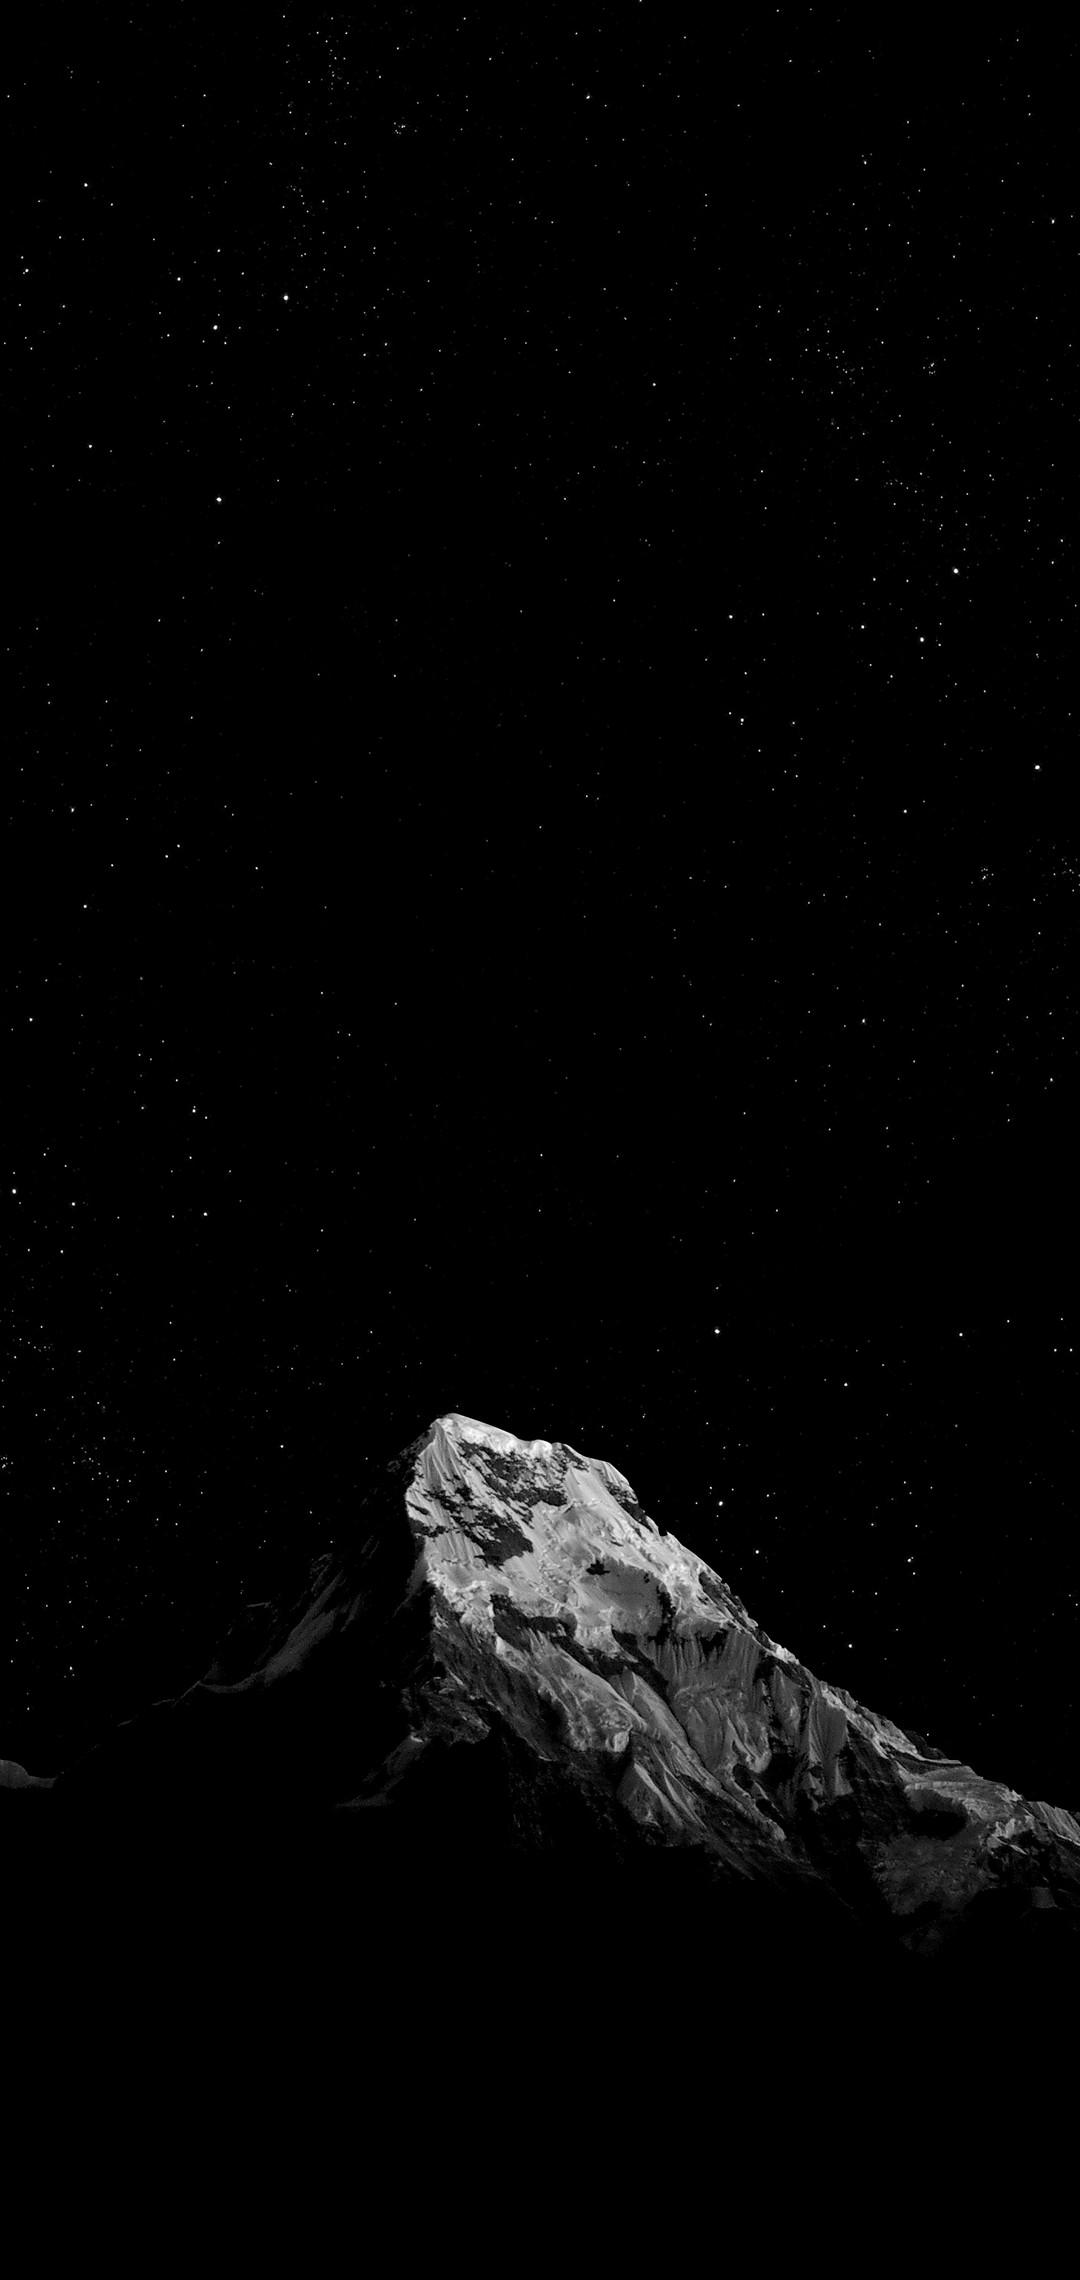 1080x2280 Wallpapers Wallpaper Cave We have a massive amount of hd images that will make your computer or smartphone. 1080x2280 wallpapers wallpaper cave